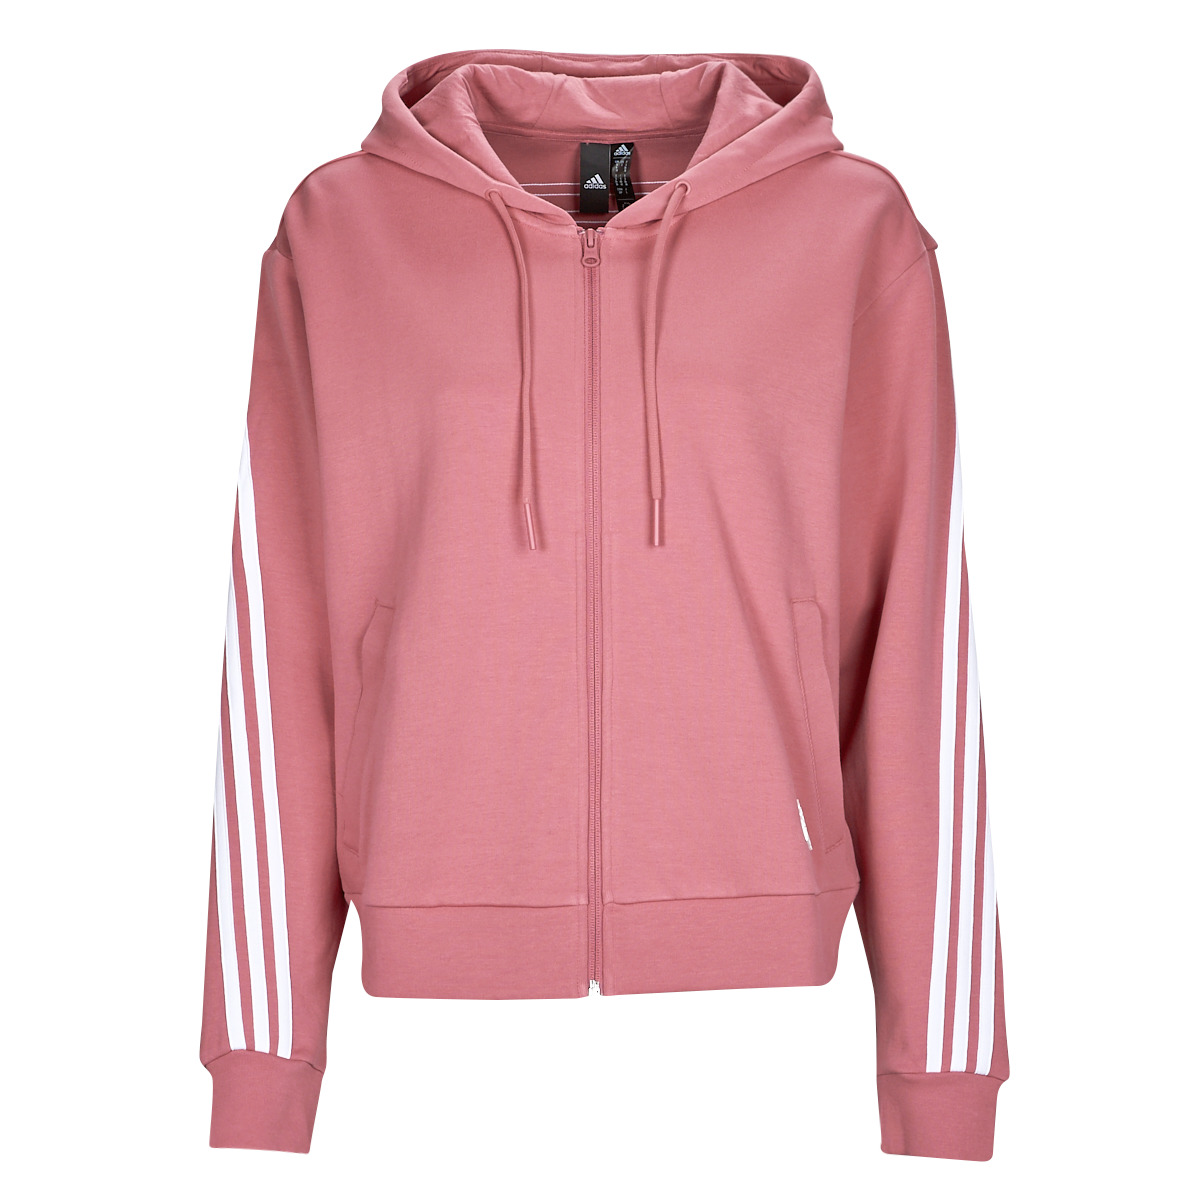 Adidas Sportswear FI 3S FZ Pink - Fast delivery | Spartoo Europe ! -  Clothing Jackets Women 66,40 €